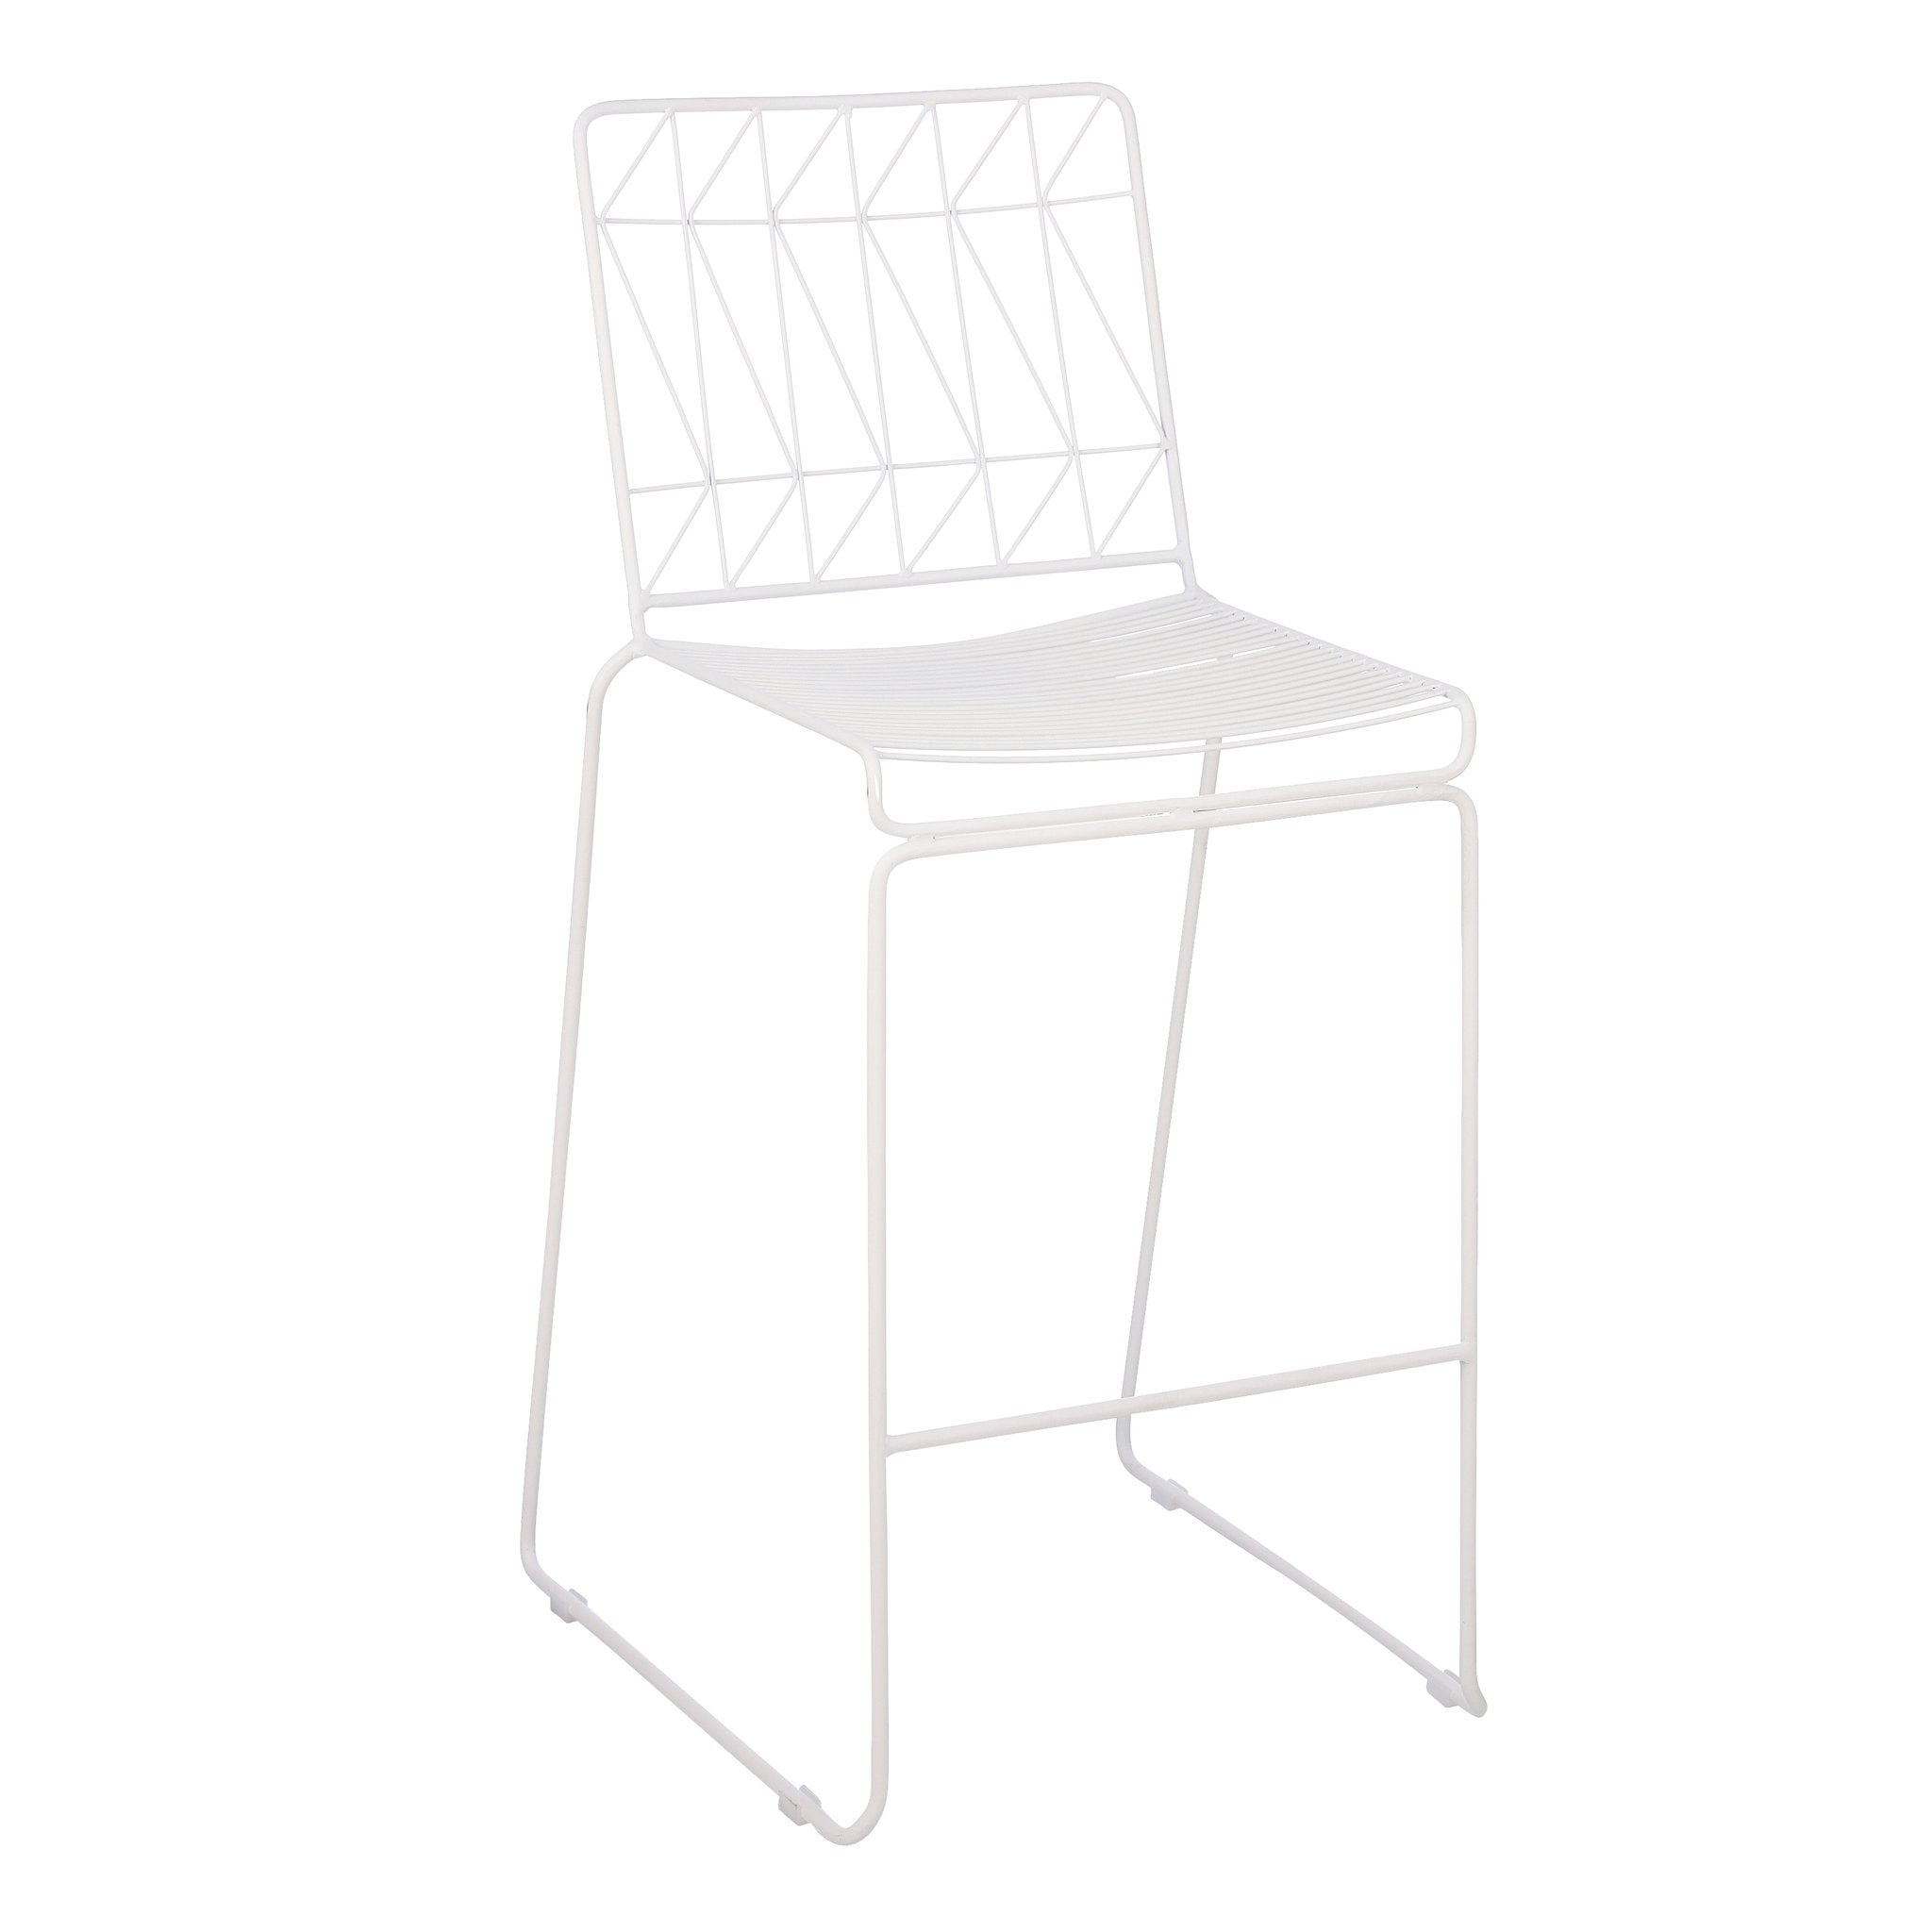 Mica Decorations Bueno Bar Stool for Outdoors - L53 x B55 x H108 cm - White